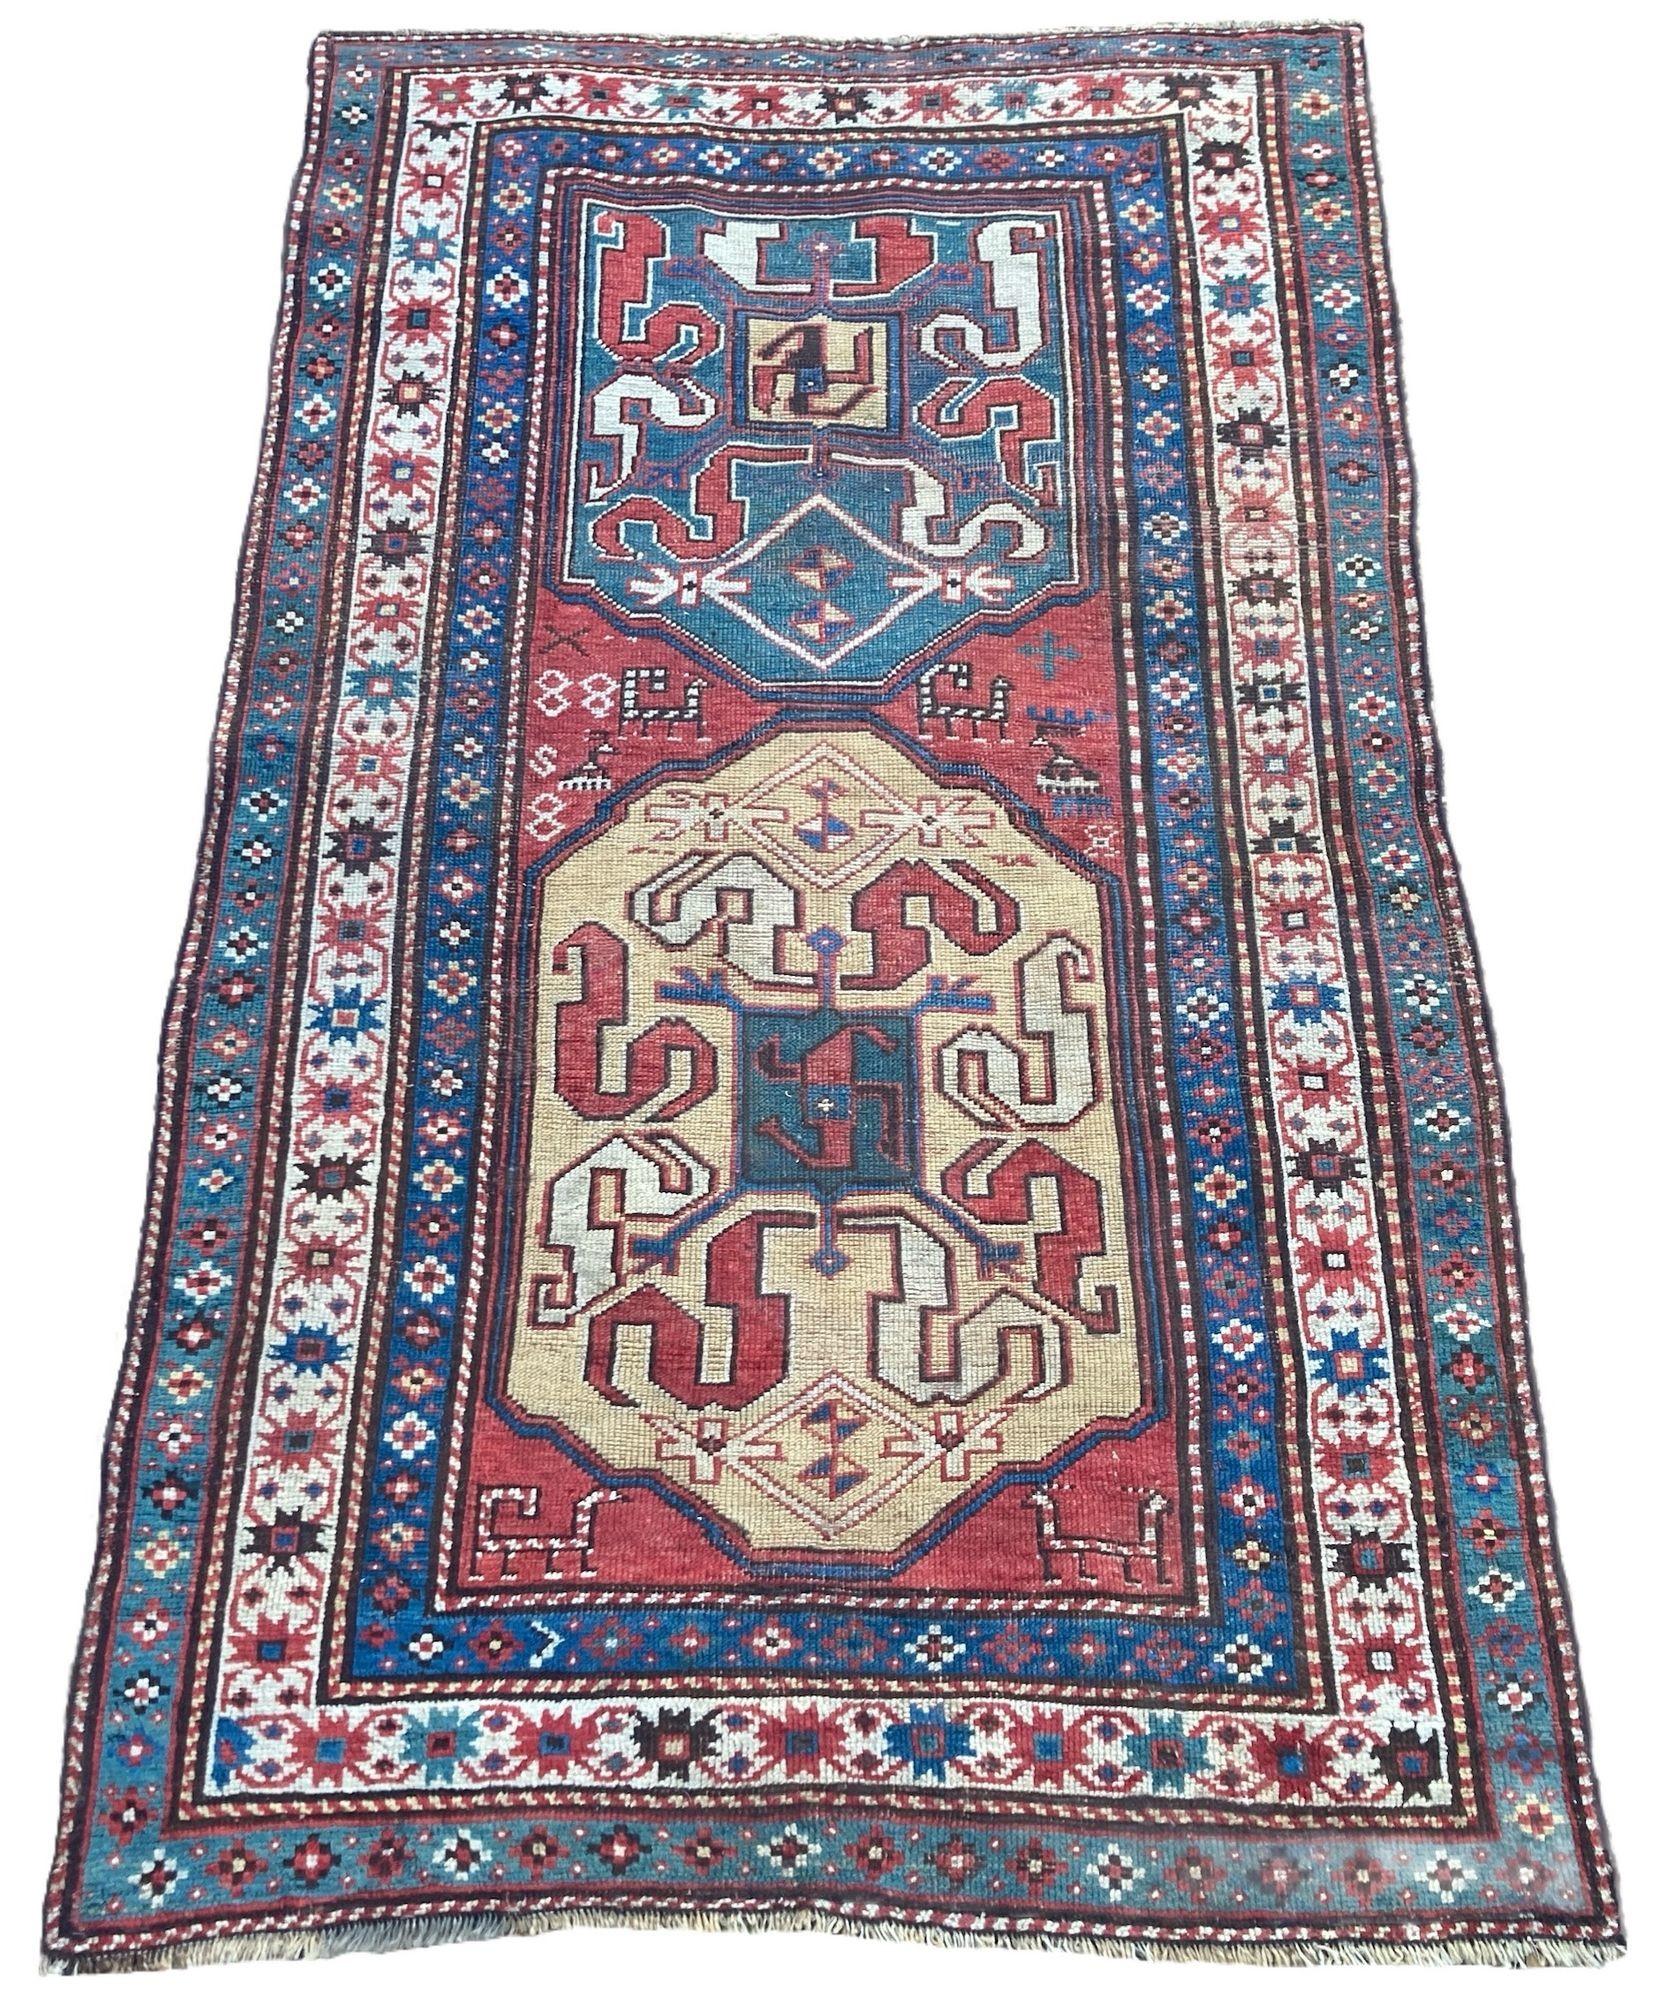 A wonderful antique Caucasian rug, hand woven in the late 19th Century near the village of Khndzoresk in modern day Armenia. The rug features two large medallions with the iconic ‘cloudband’ design on a terracotta red field and ivory border. Note